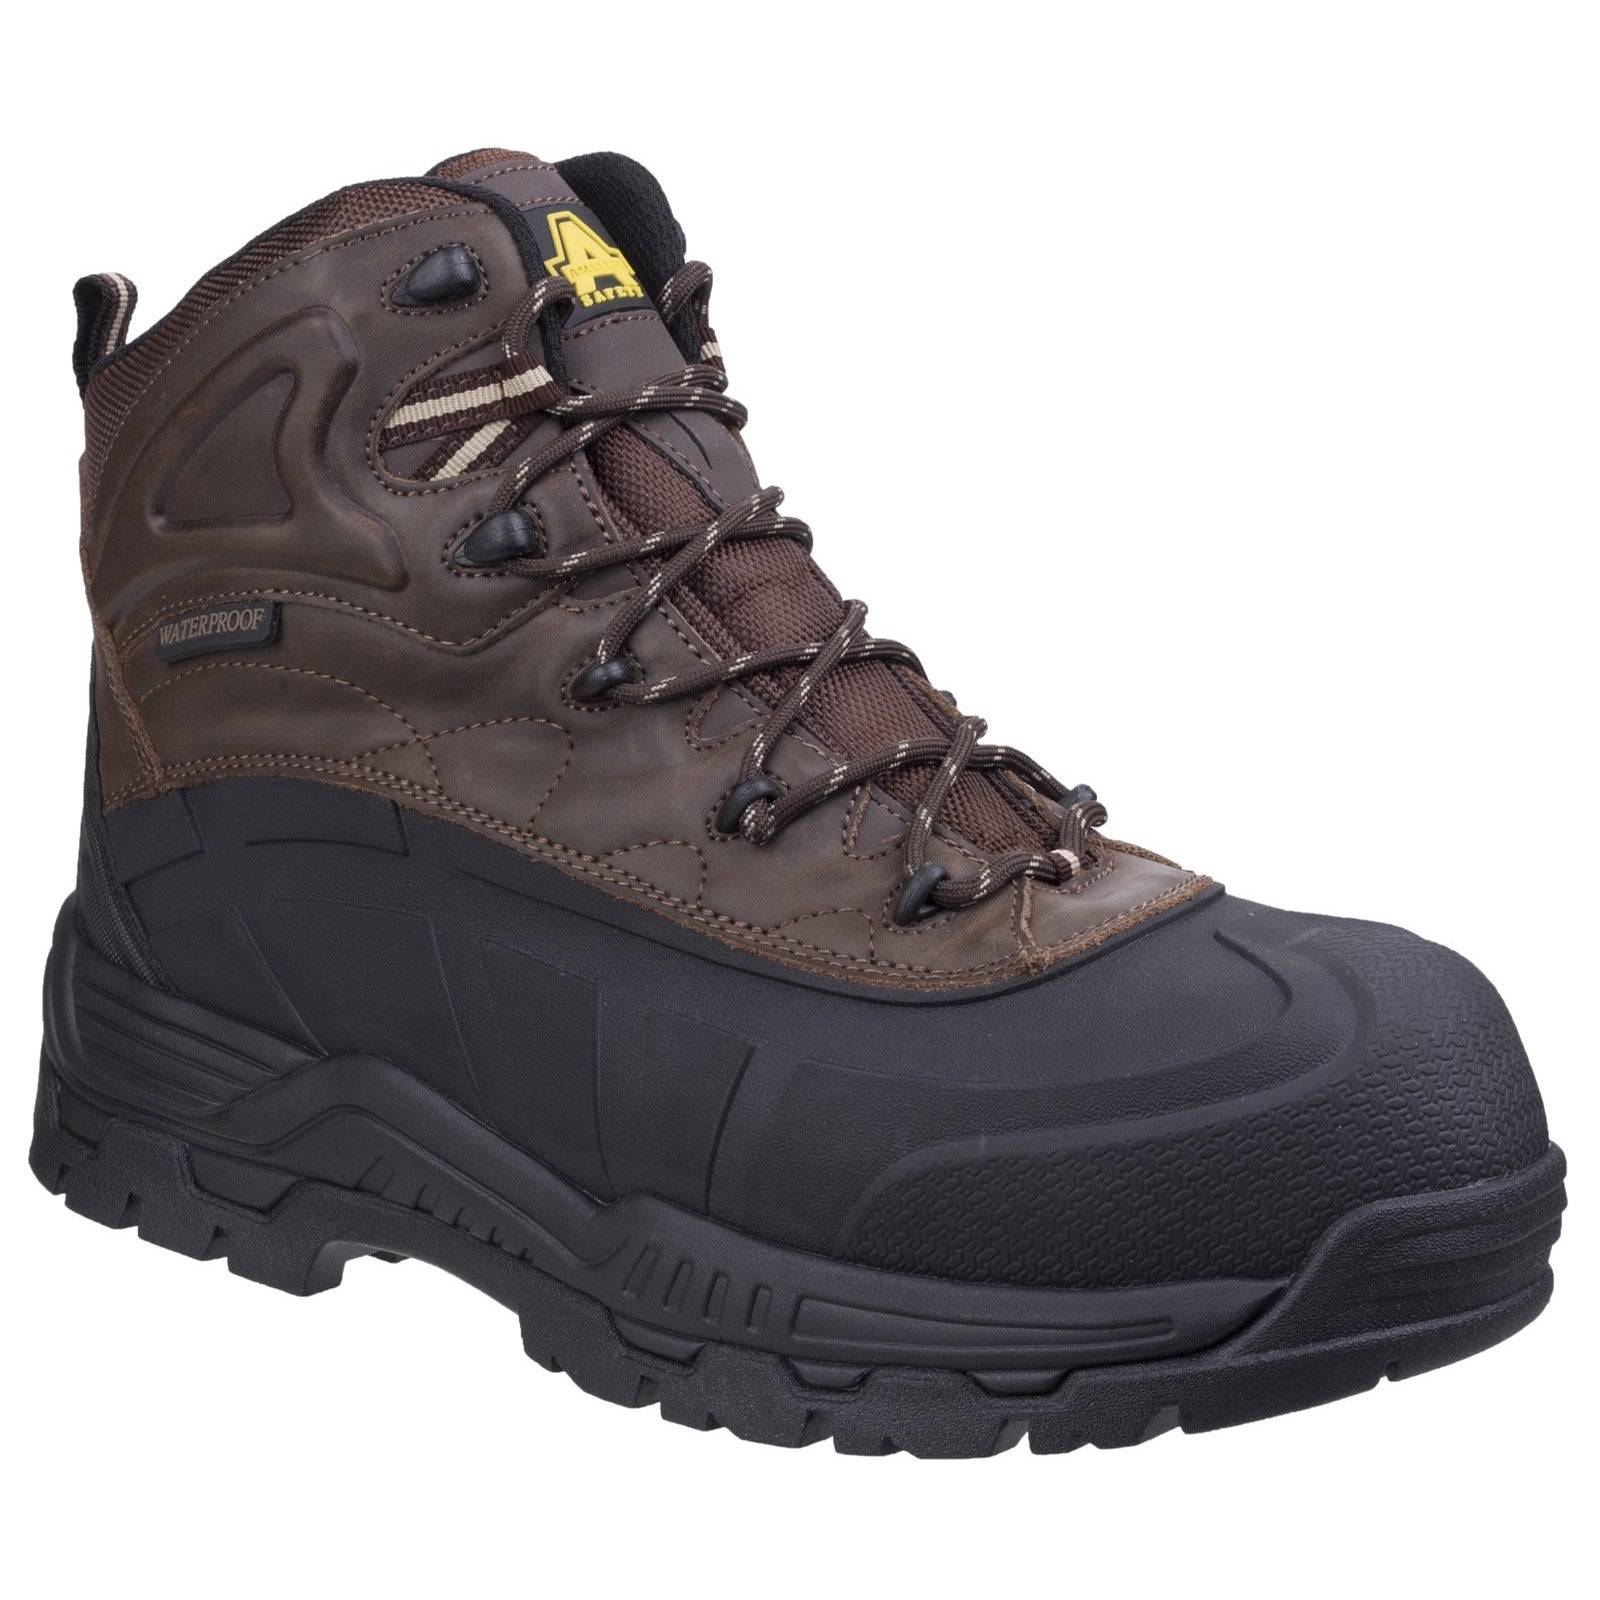 FS430 Orca Safety Boot, Amblers Safety